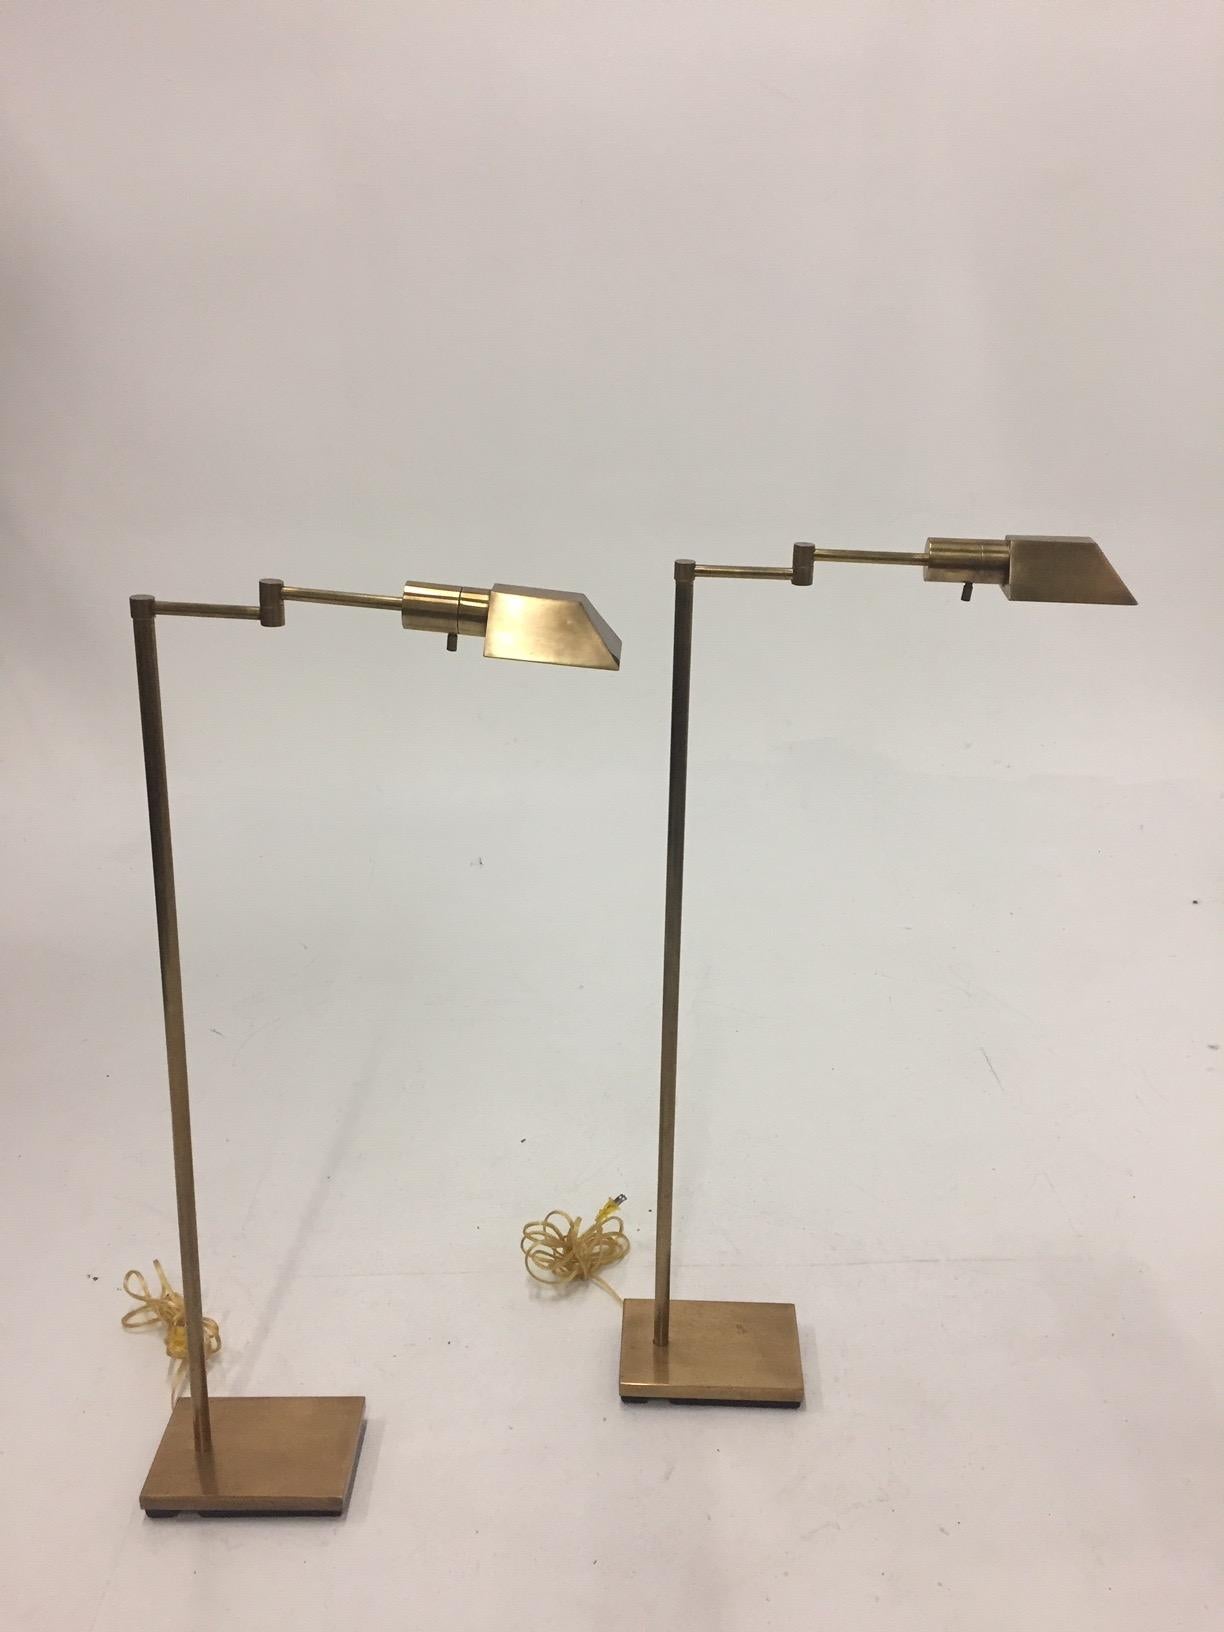 Functional and Mid-Century Modern cool pair of brass swing arm adjustable floor lamps. When fully opened 20